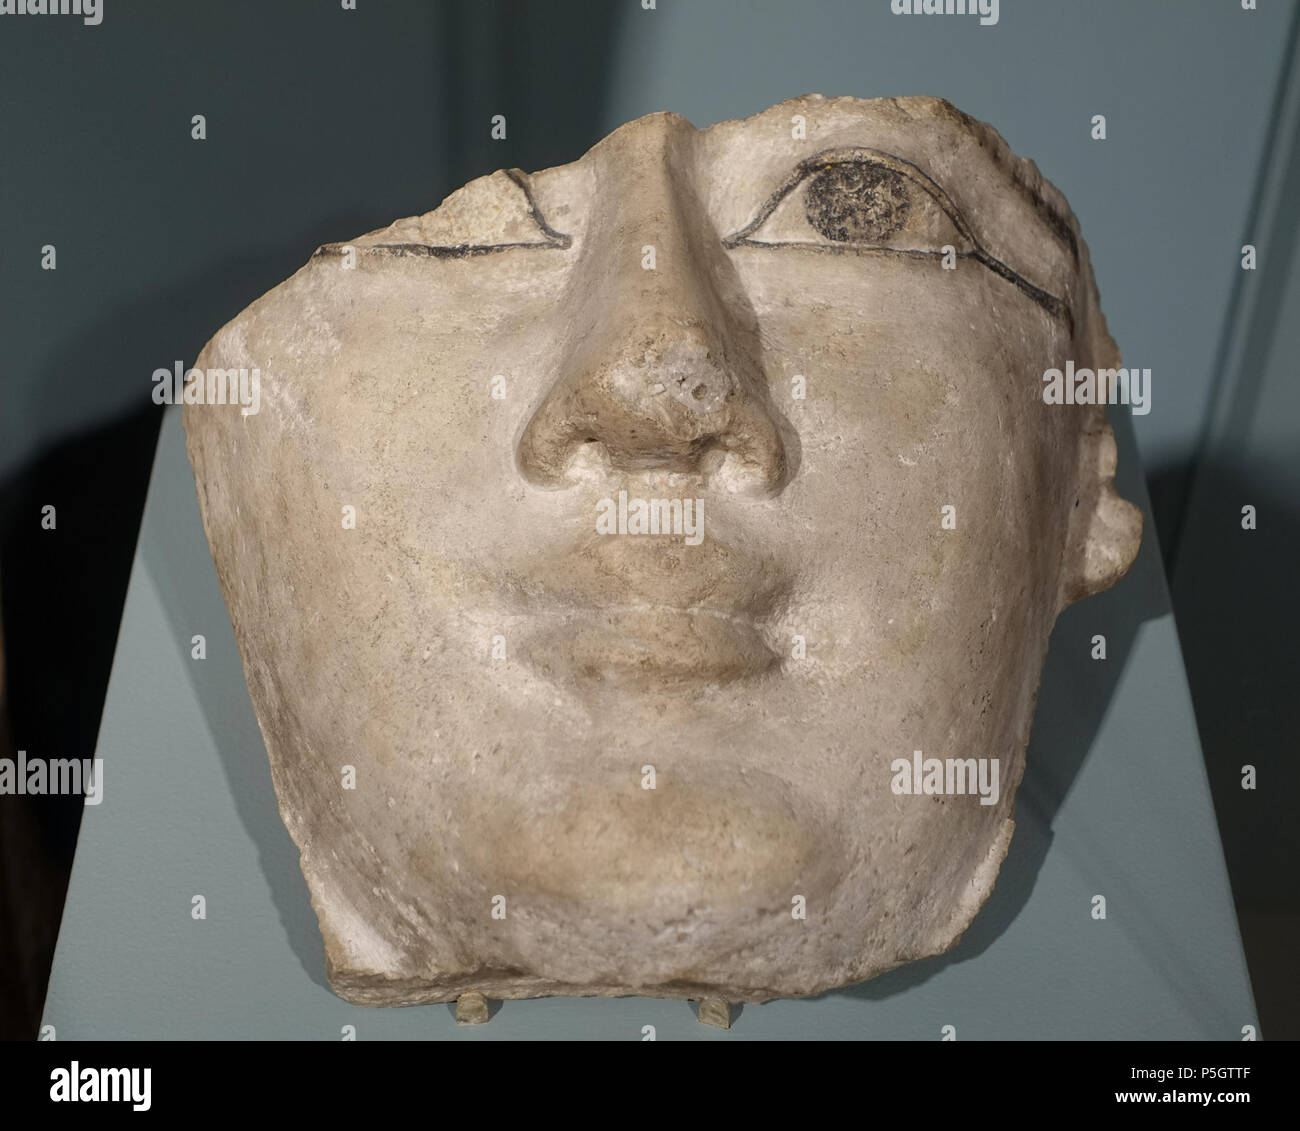 N/A. English: Exhibit in the Middlebury College Museum of Art - Middlebury, Vermont, USA. 4 March 2017, 15:03:58. Daderot 544 Face from a monolithic sarcophagus lid, Egyptian, Ptolemaic period, 323-330 BC, limestone with black paint - Middlebury College Museum of Art - Middlebury, VT - DSC08047 Stock Photo